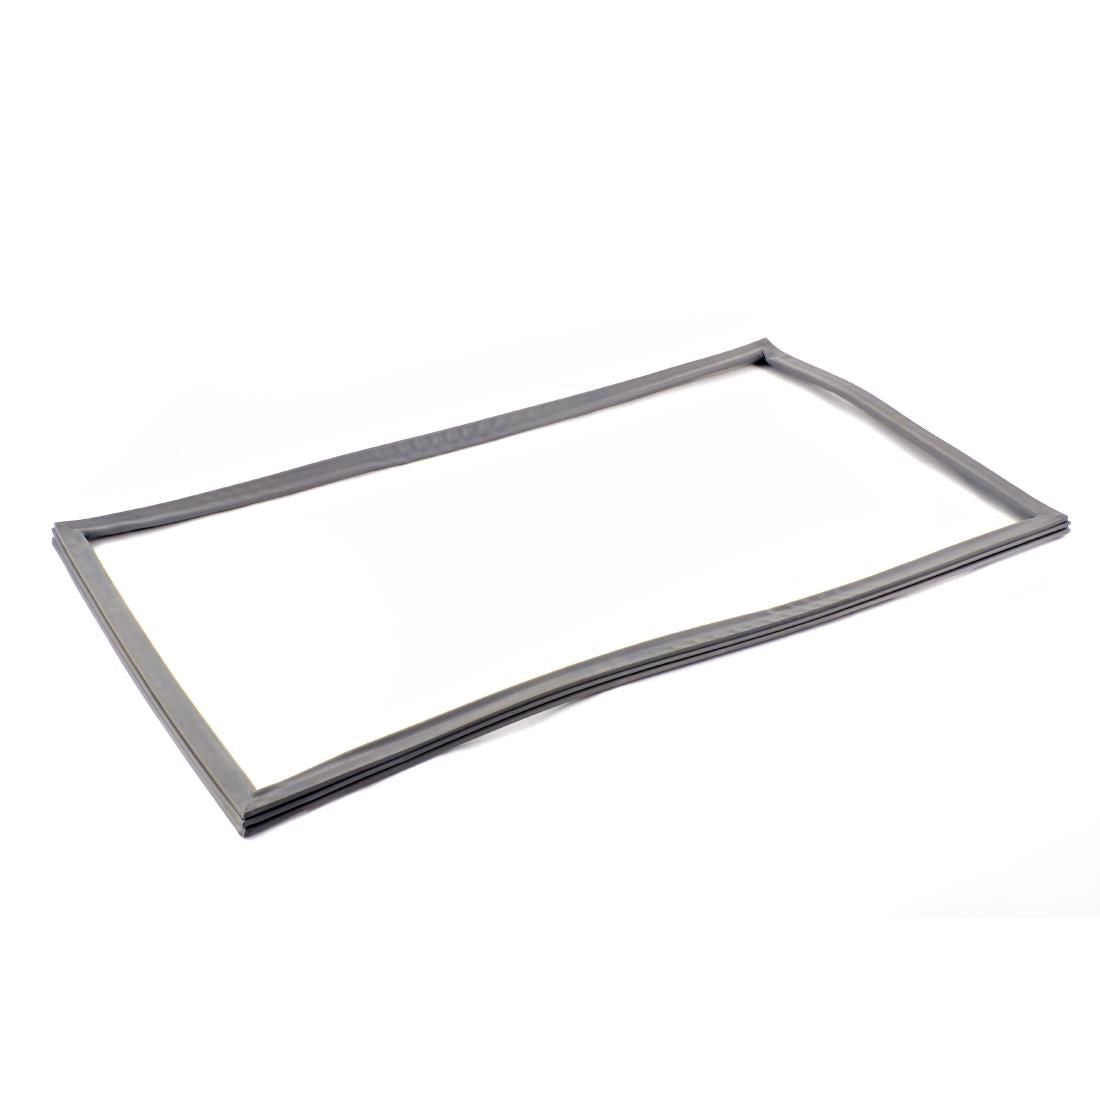 AD897 Gasket JD Catering Equipment Solutions Ltd